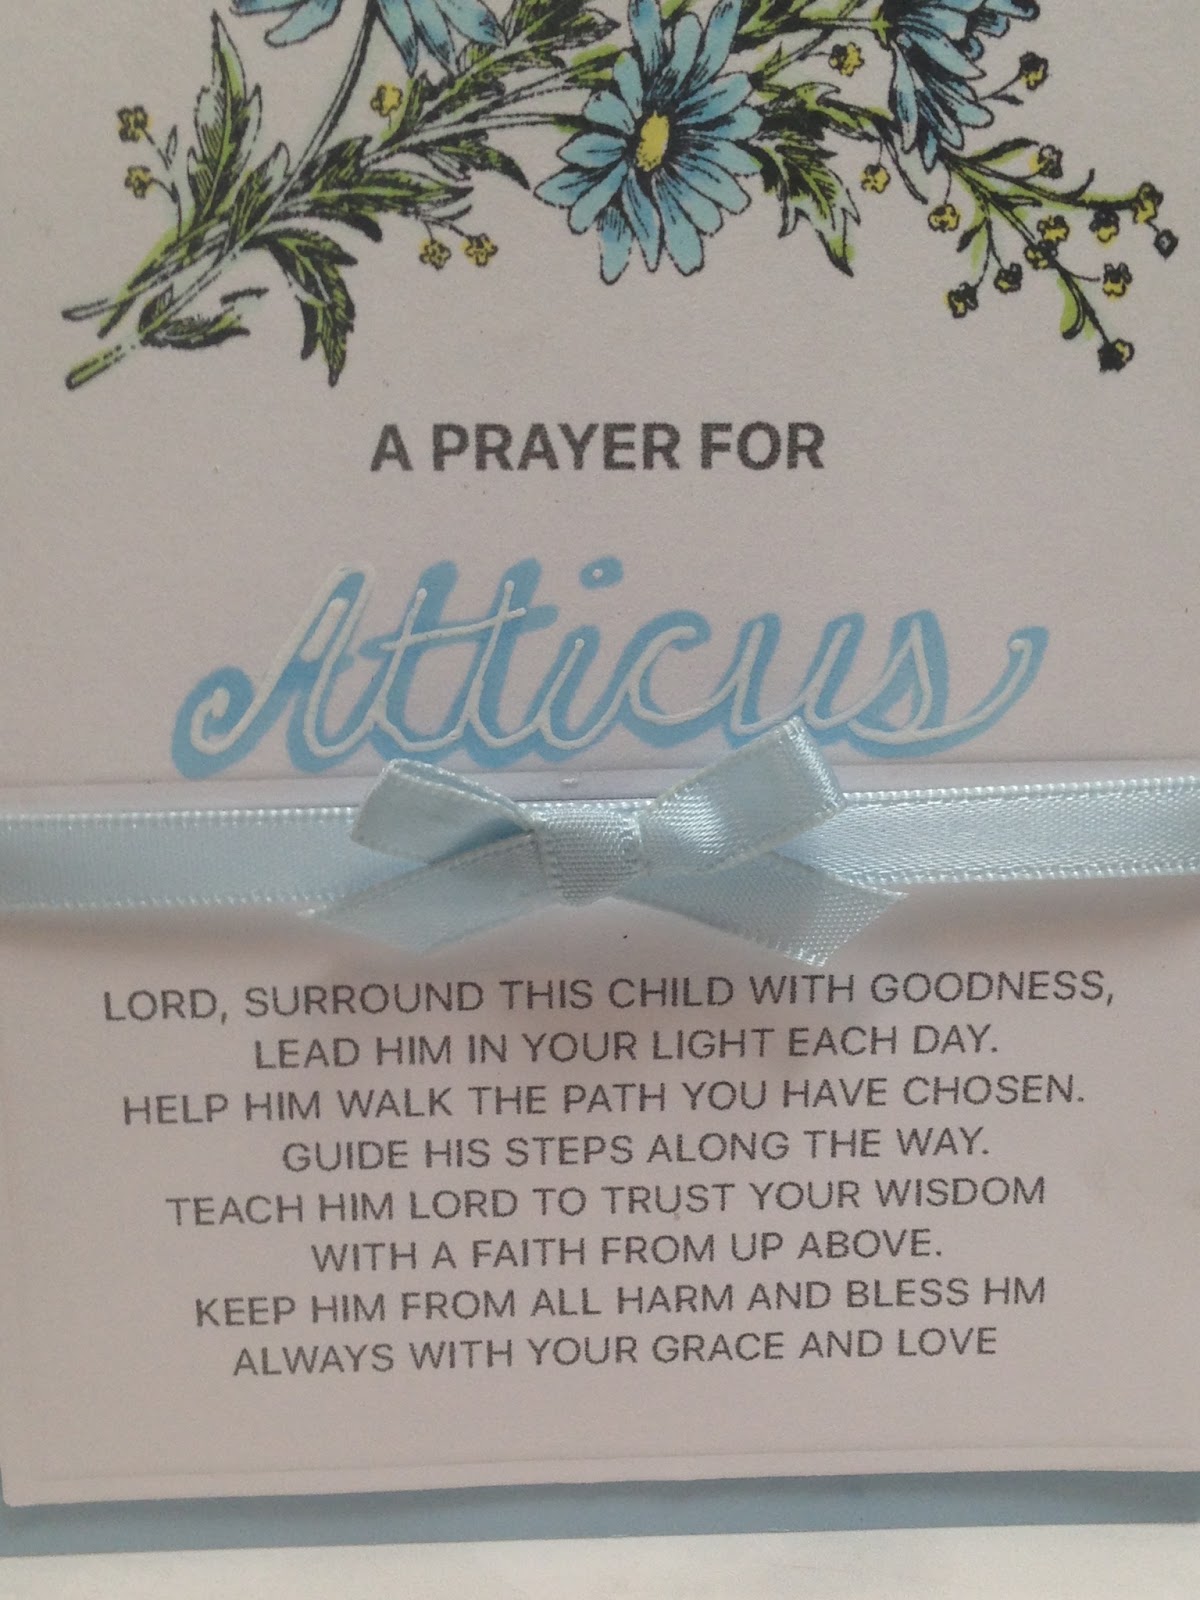 amy-s-creative-pursuits-how-to-make-a-baby-dedication-card-for-a